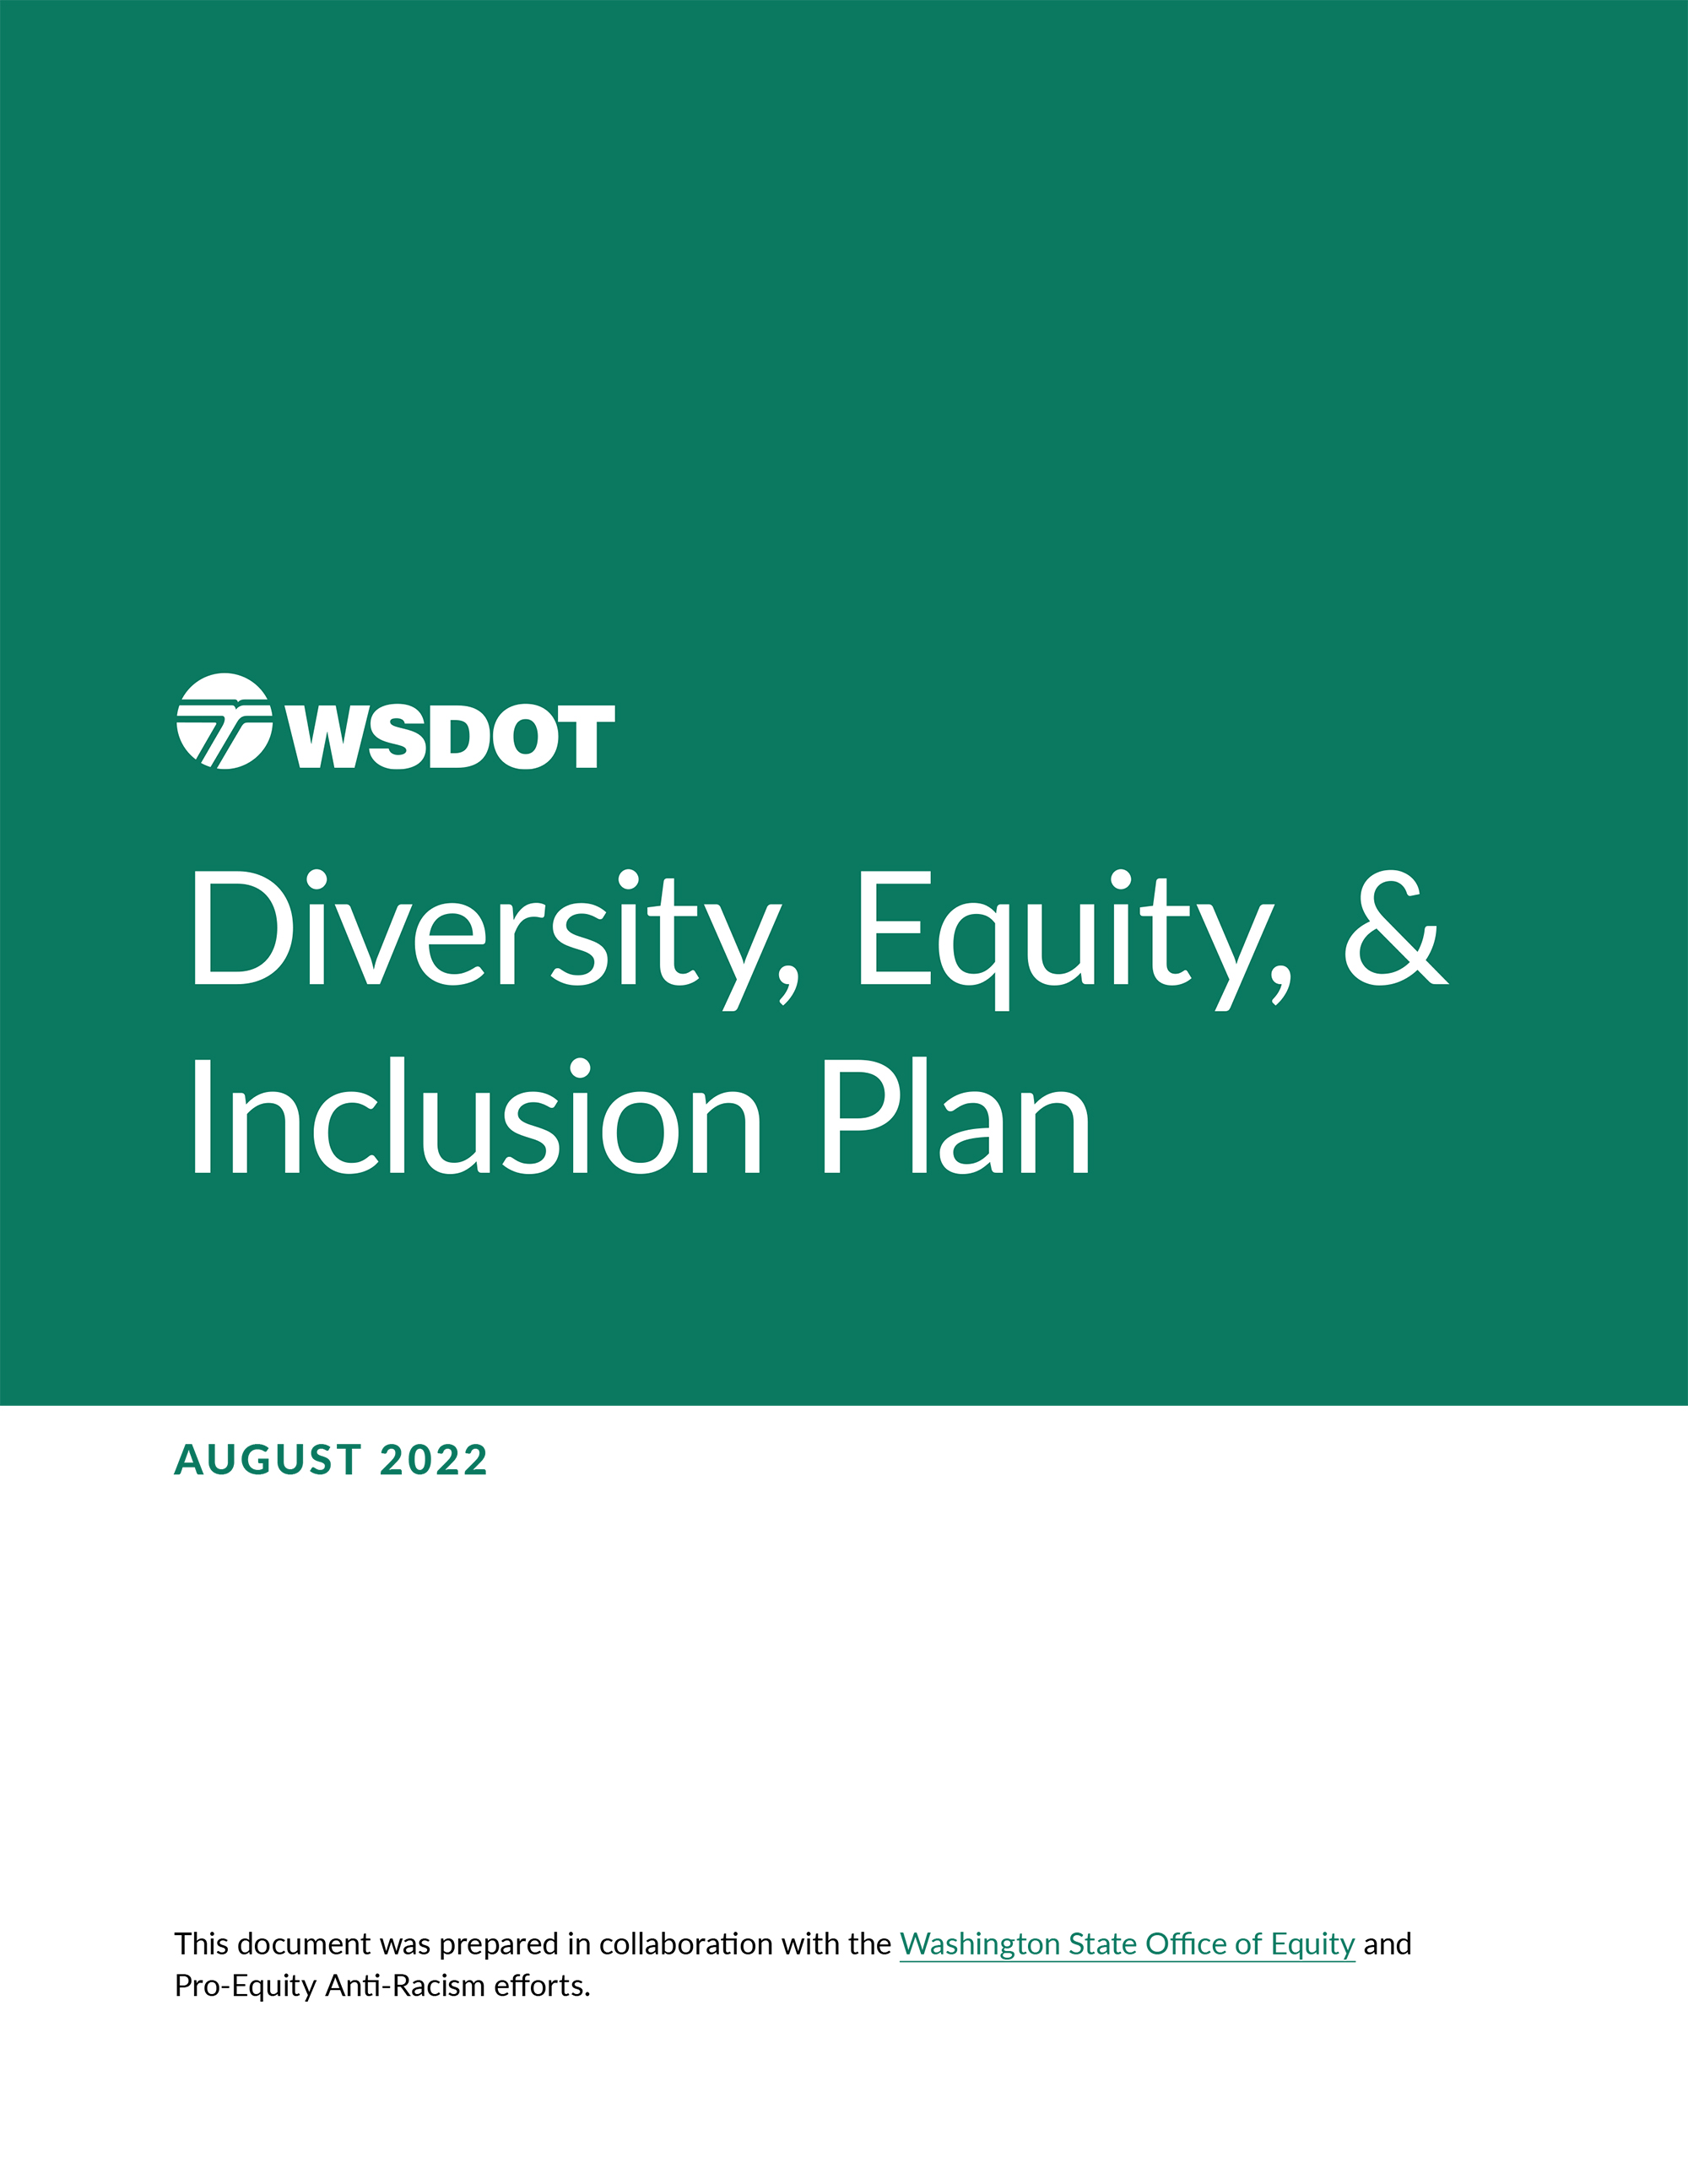 Cover image of Diversity, Equity and Inclusion plan book.